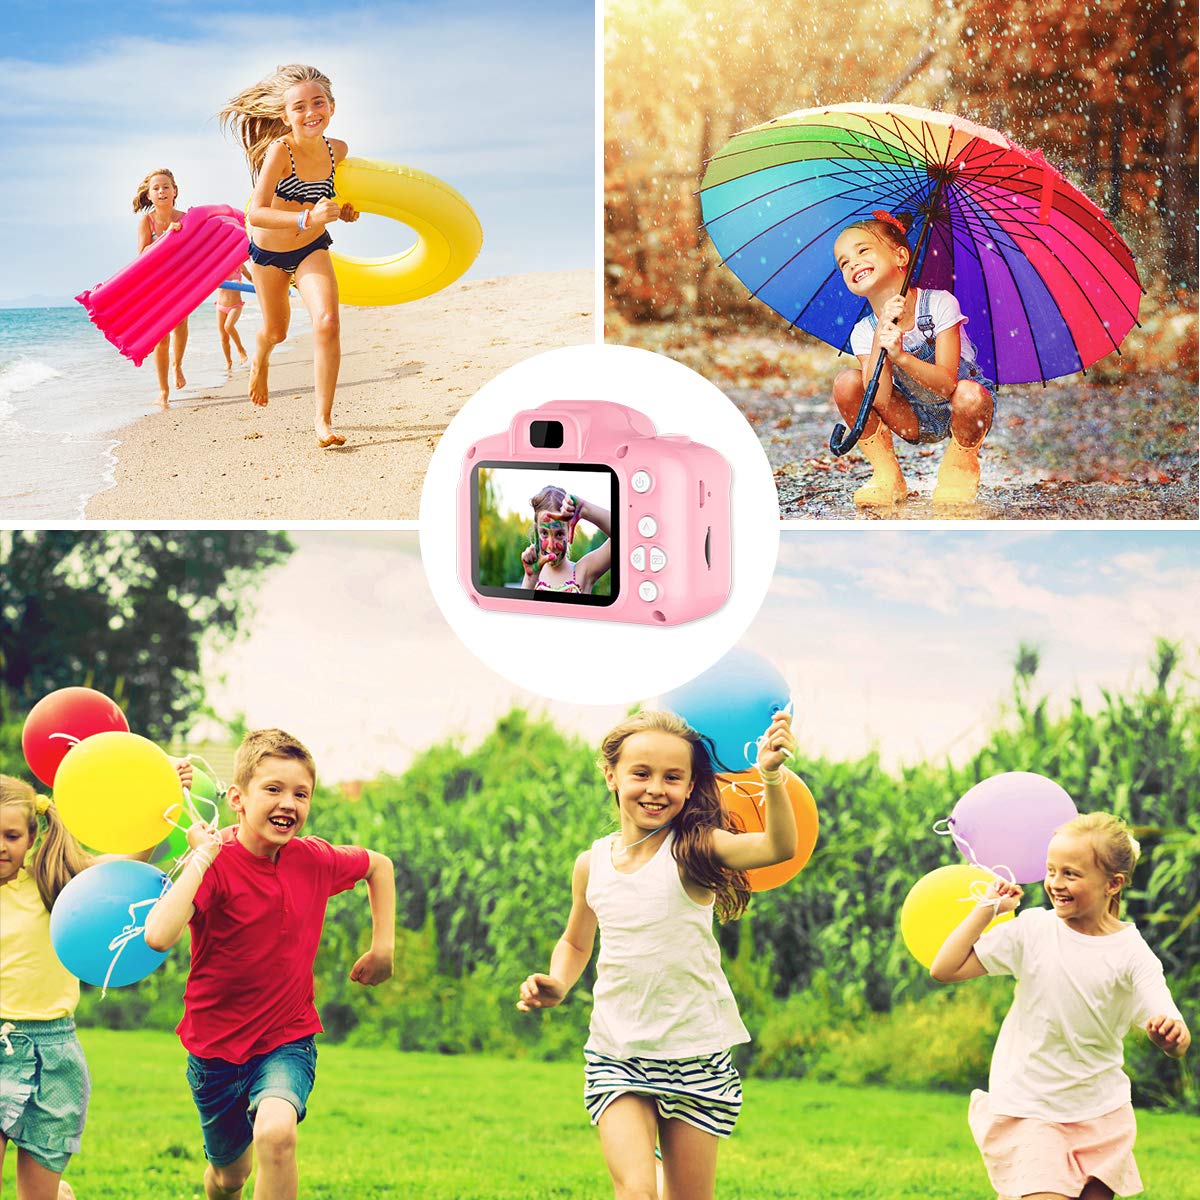 OZMI Upgrade Kids Selfie Camera, Christmas Birthday Gifts for Girls Age 3-12, Children Digital Cameras 1080P 2 Inch Toddler, Portable Toy for 3 4 5 6 7 8 9 10 Year Old Girls with 32GB SD Card (Pink)